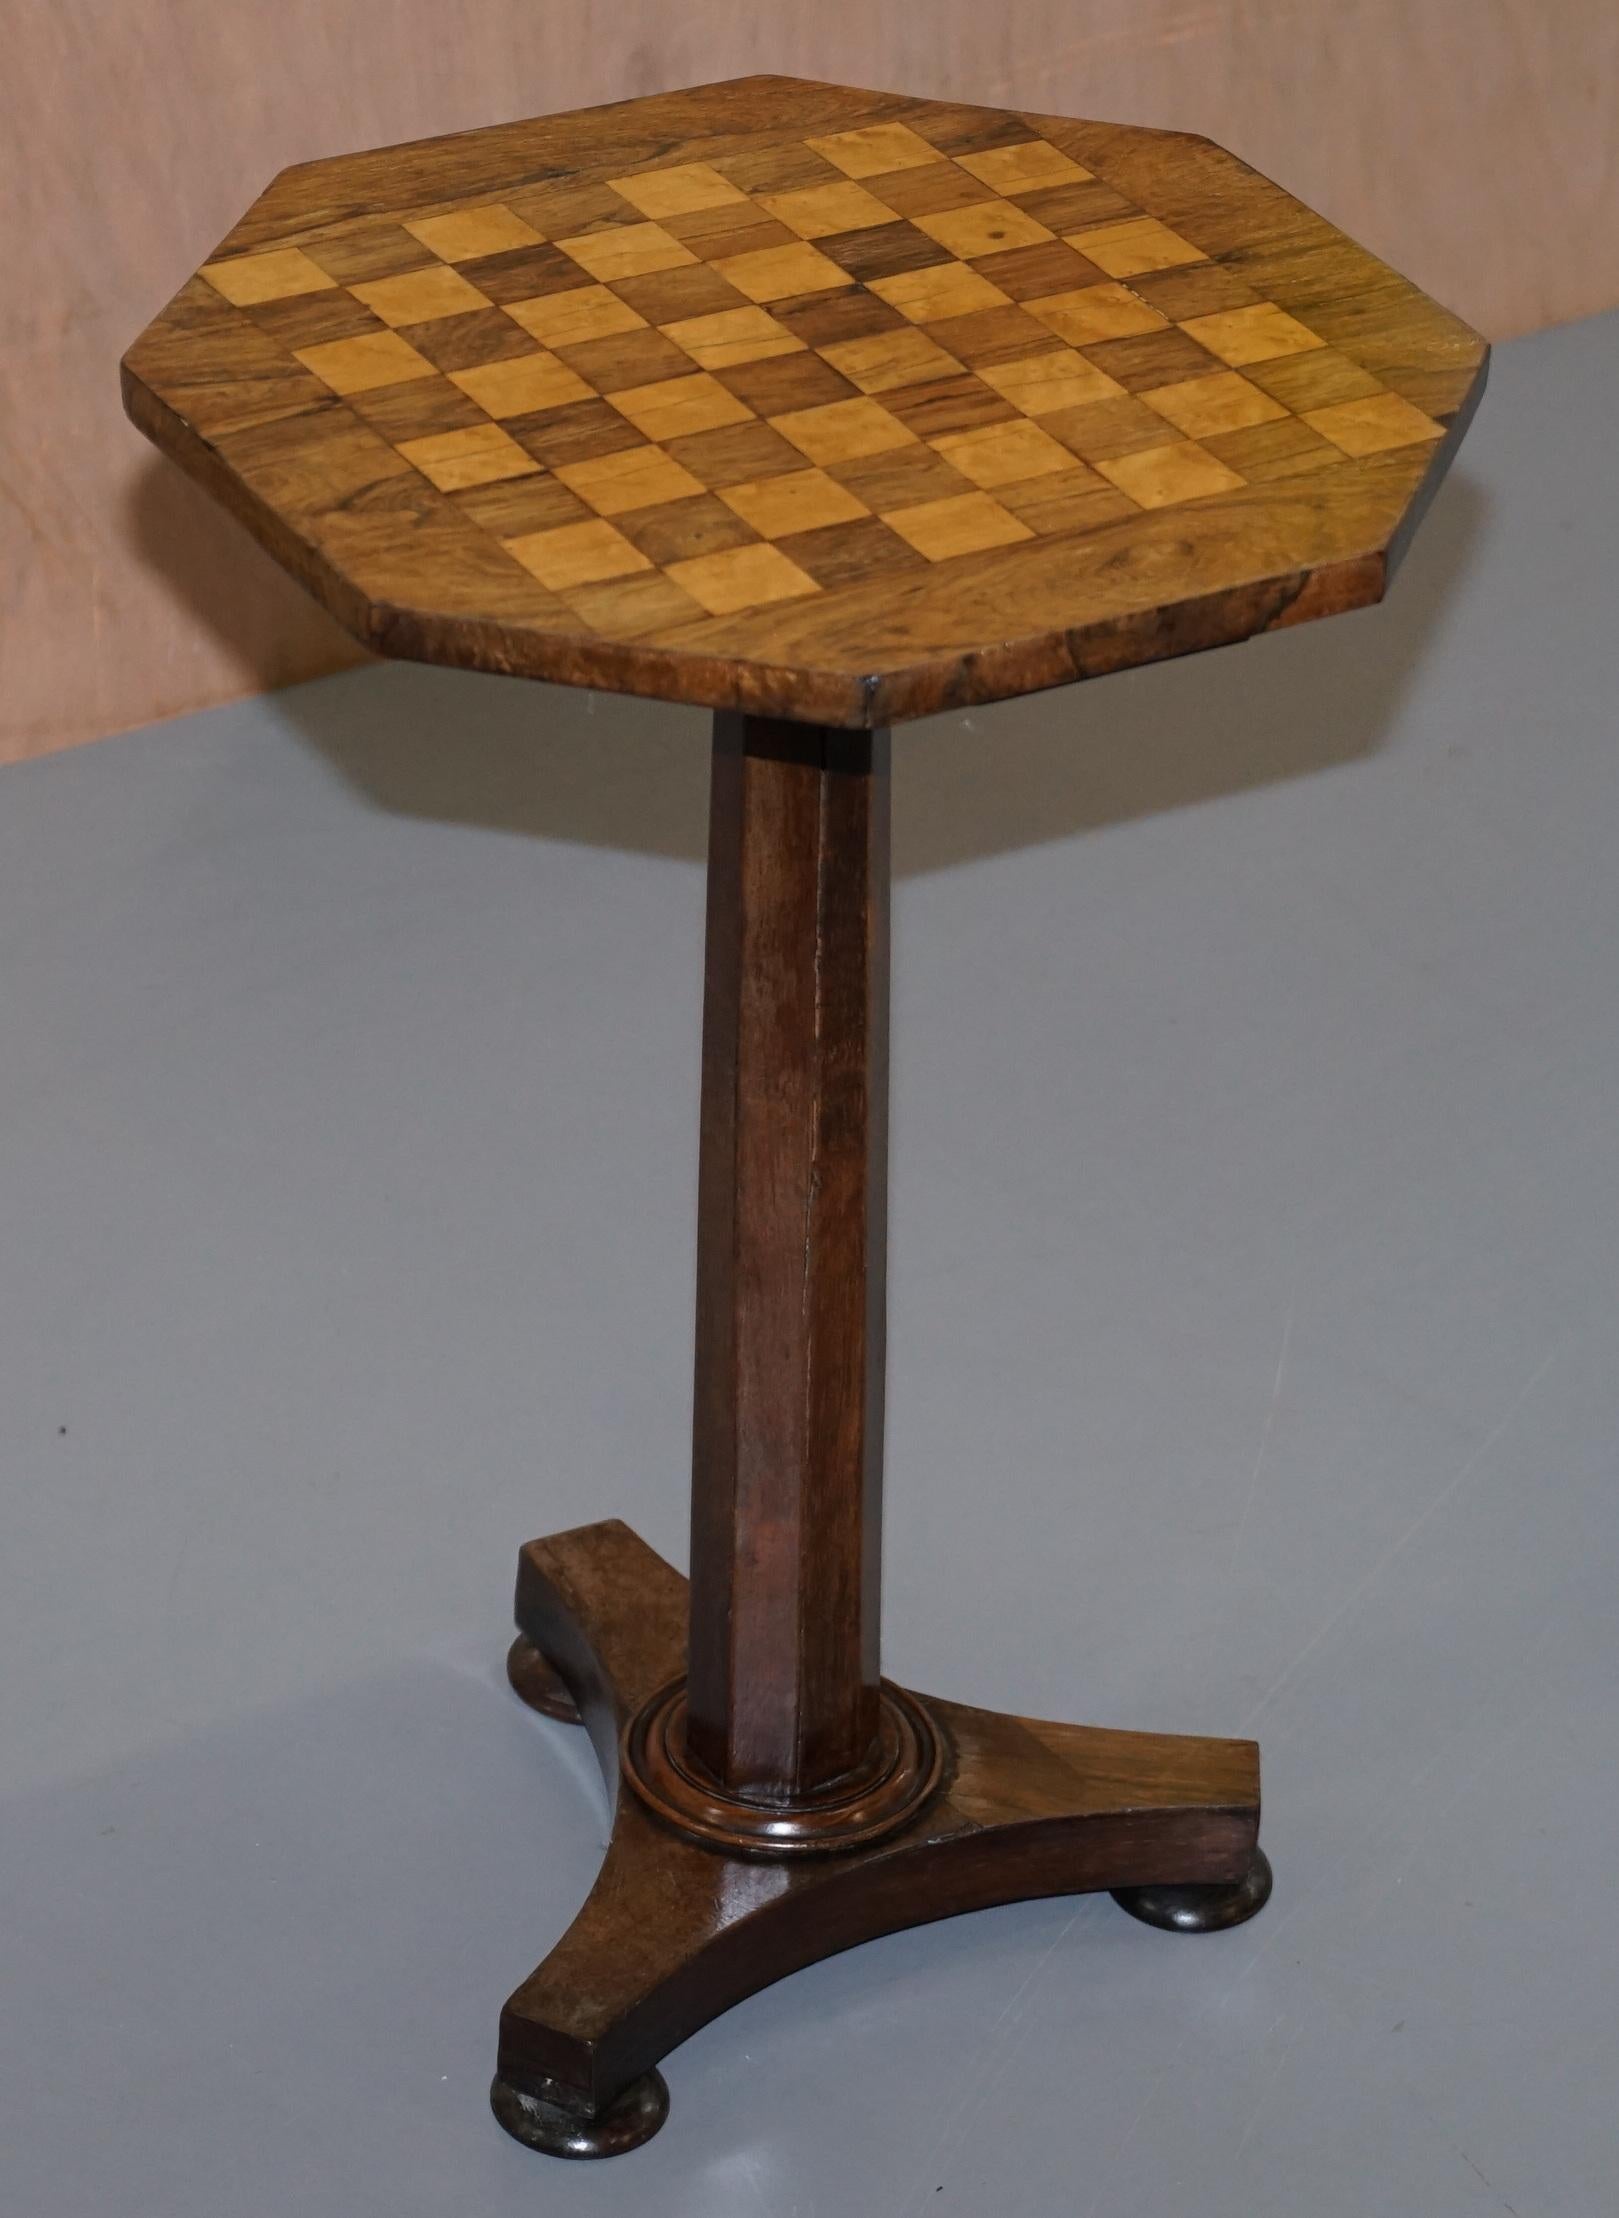 We are delighted to offer for sale this lovely original circa 1860 rosewood pedestal chess games table

A very good looking well made and function piece of furniture, extremely decorative, its made with glorious Rosewood which is one of my